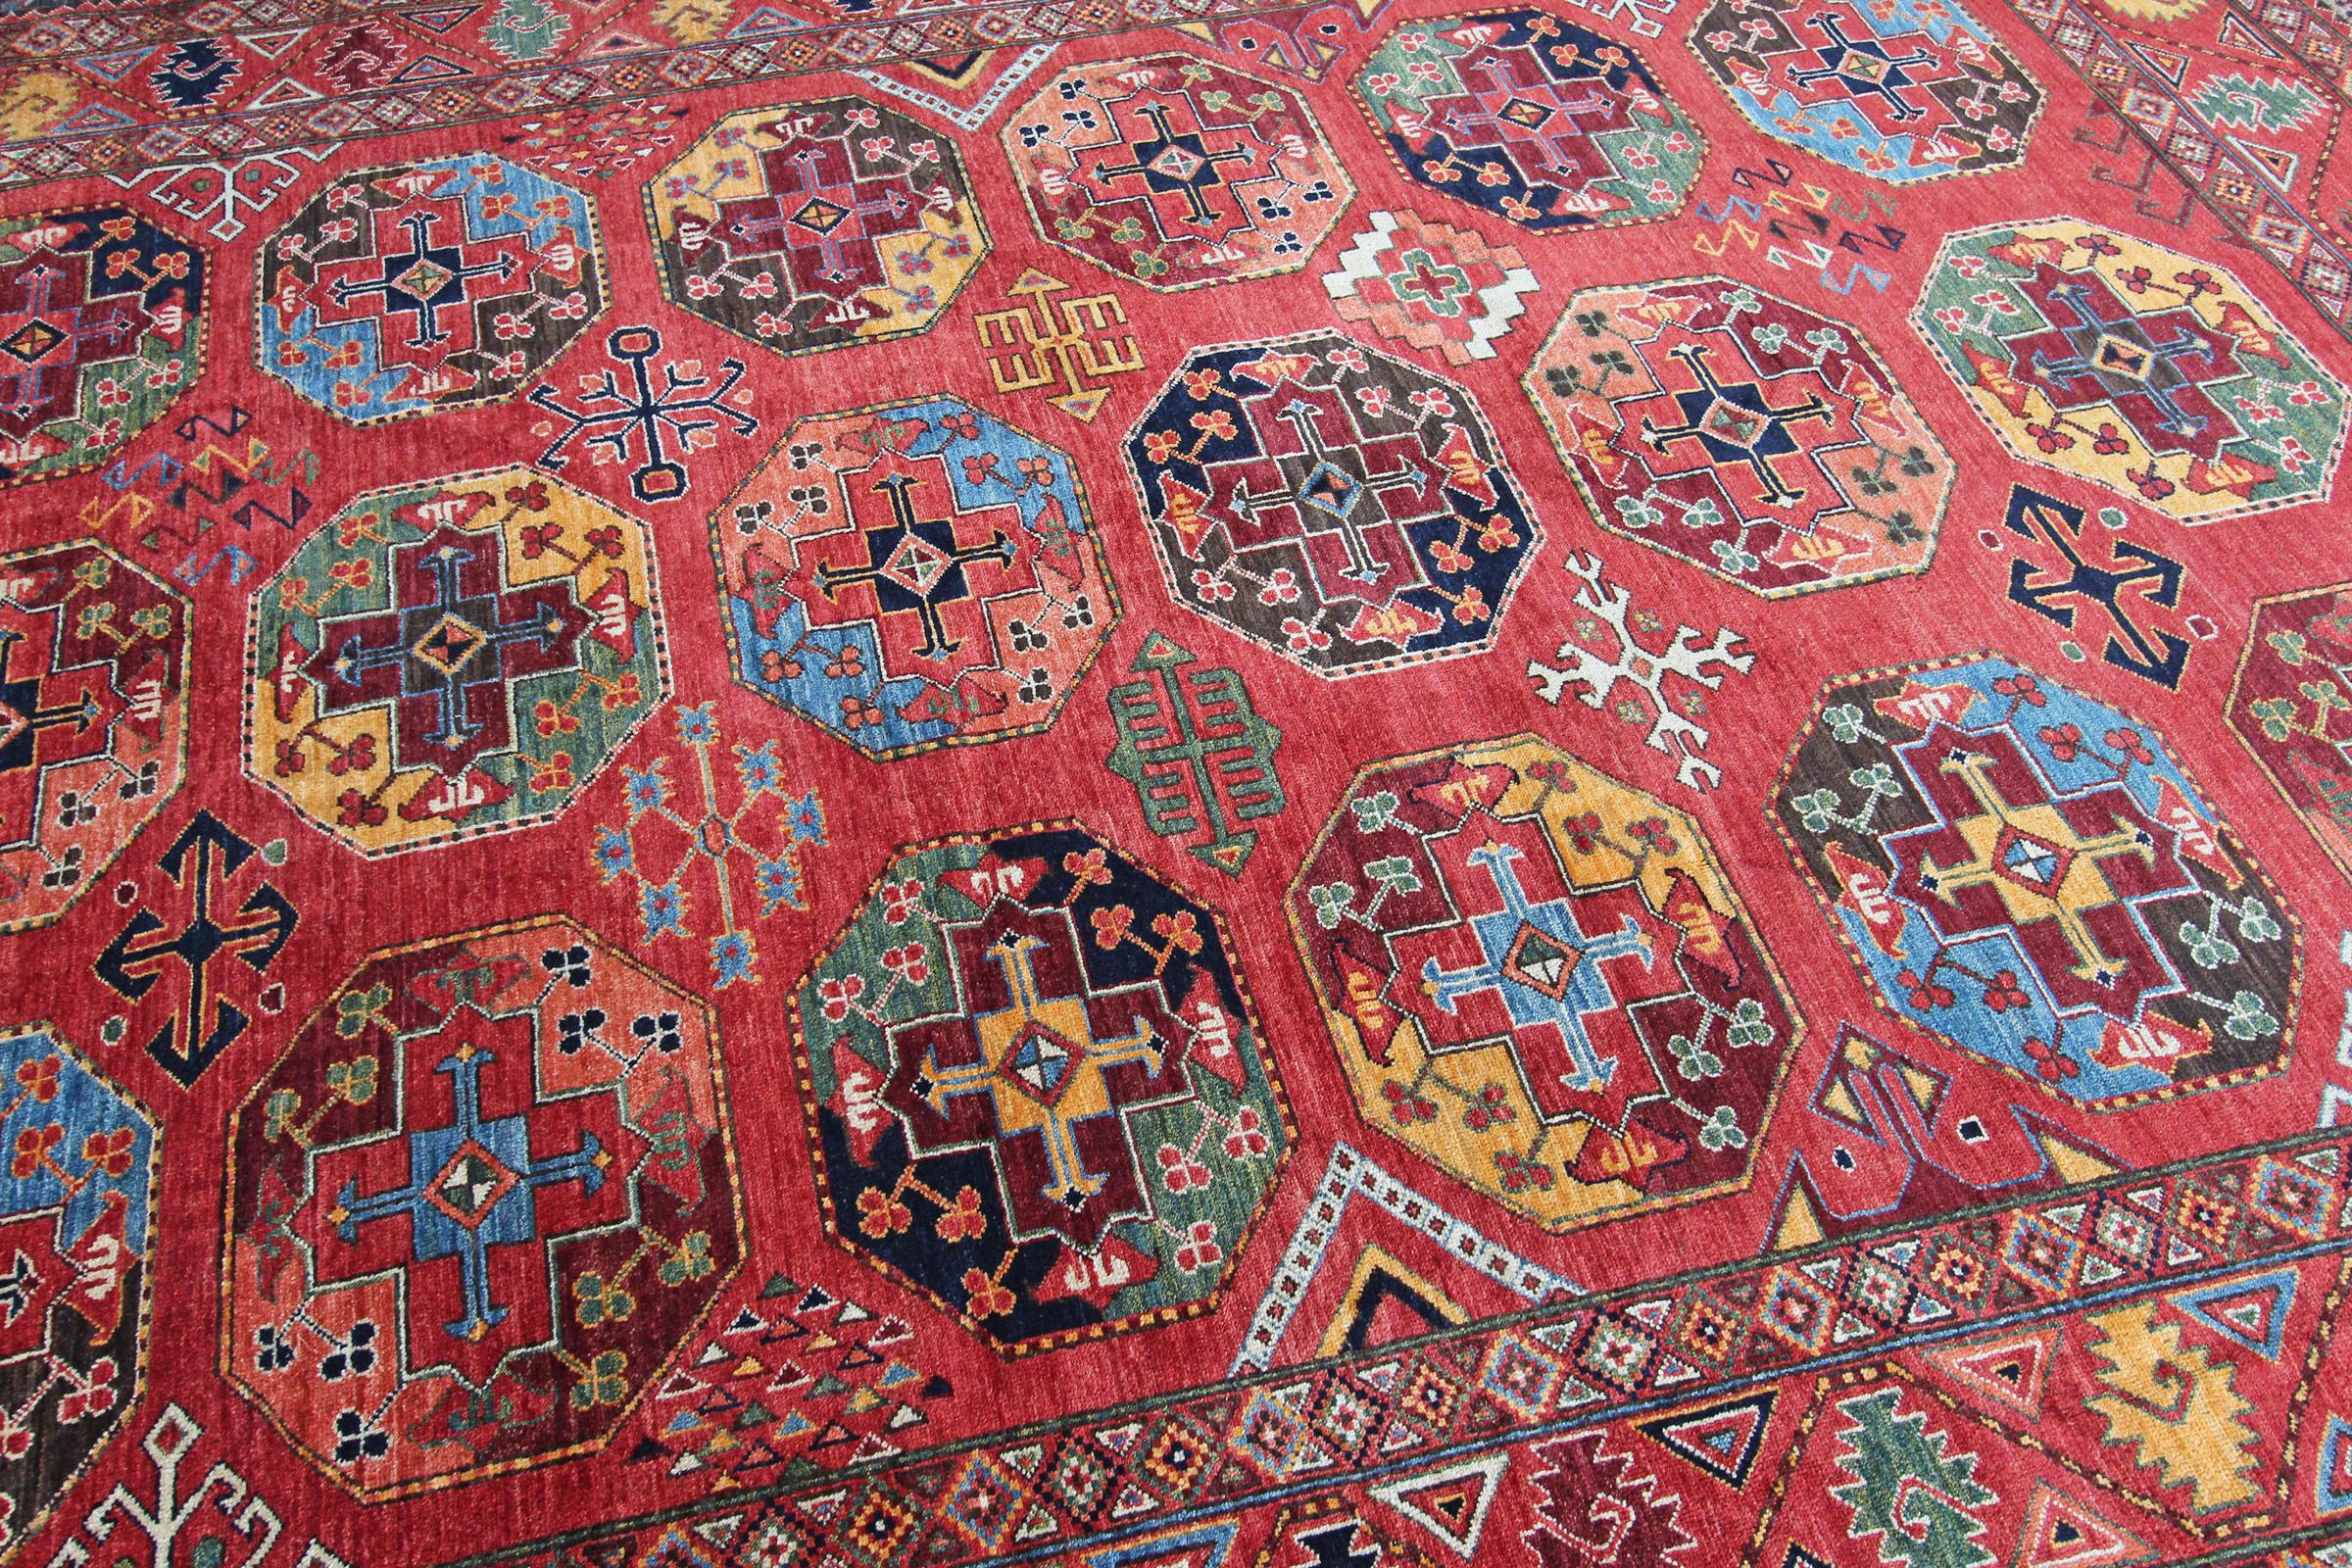 A brand new beautiful modern Ersari carpet using a traditional pattern seen on antique pieces woven by Turkmenistan weavers with the large 'Gul' motifs.  This new contemporary rug has been hand-woven with exceptional colours using natural dyes and